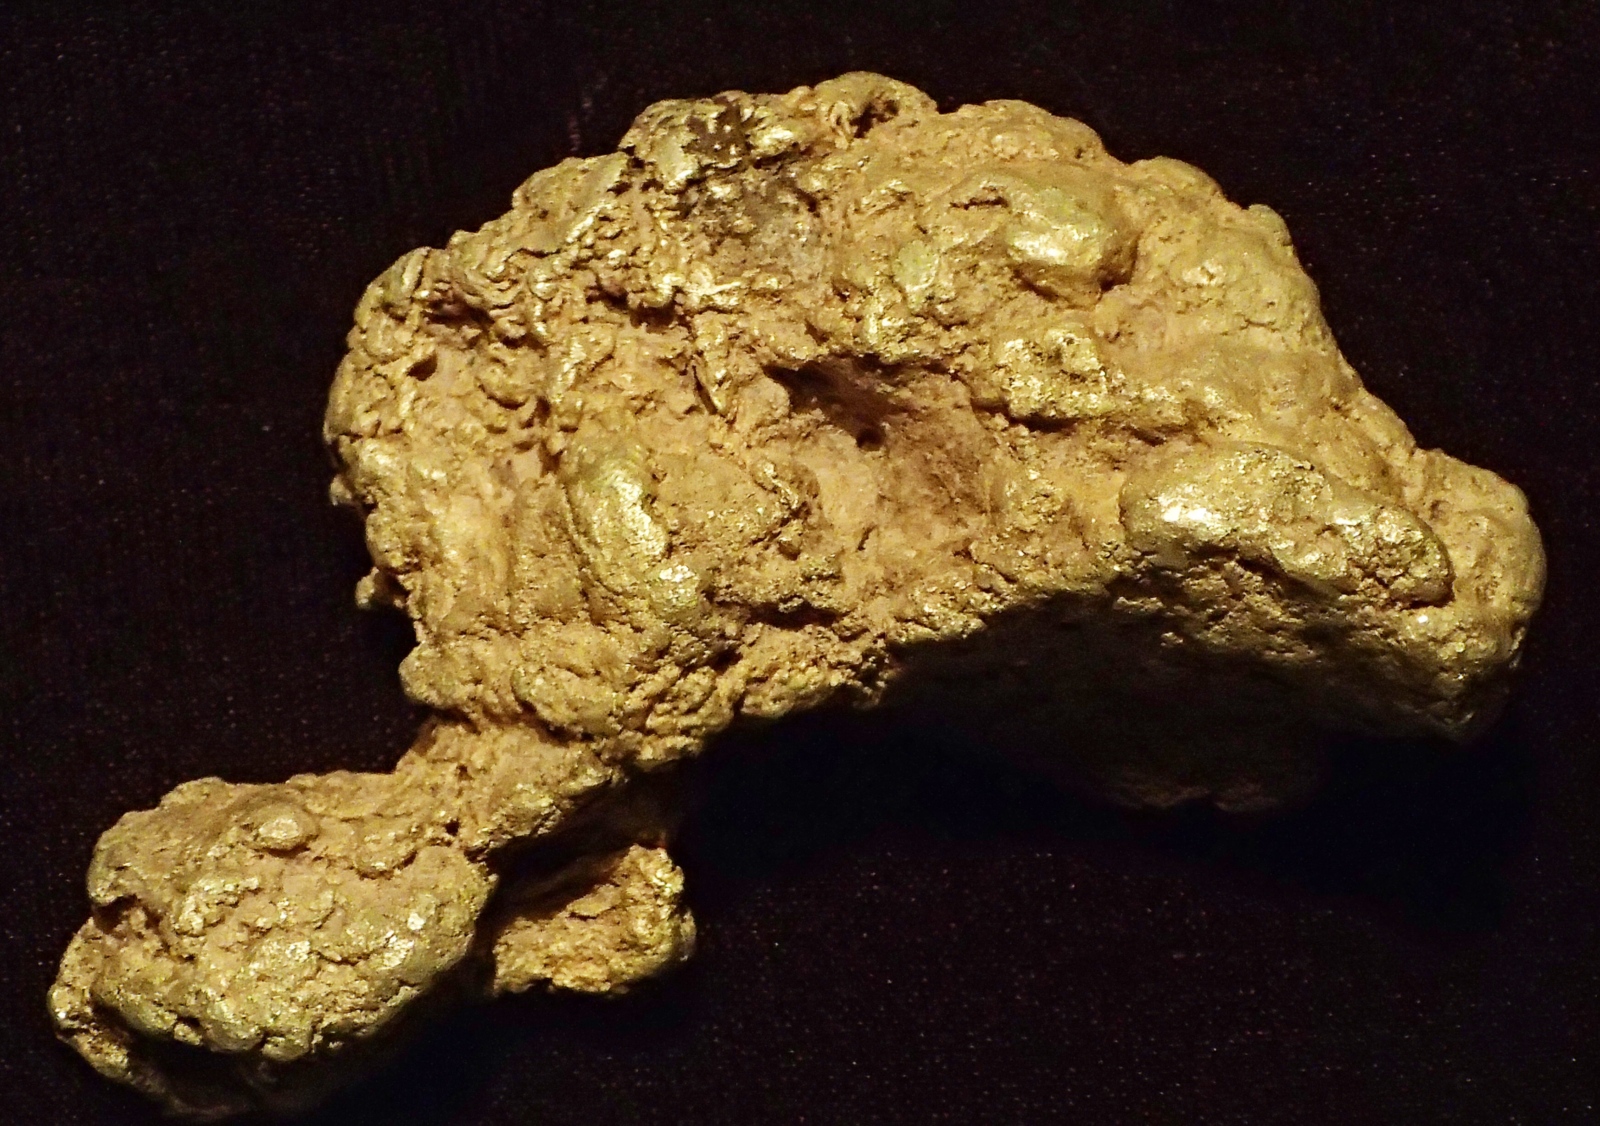  Gold nugget (placer gold) from Colorado, USA. CC-BY-2.0, James St. John (26.10.2013)